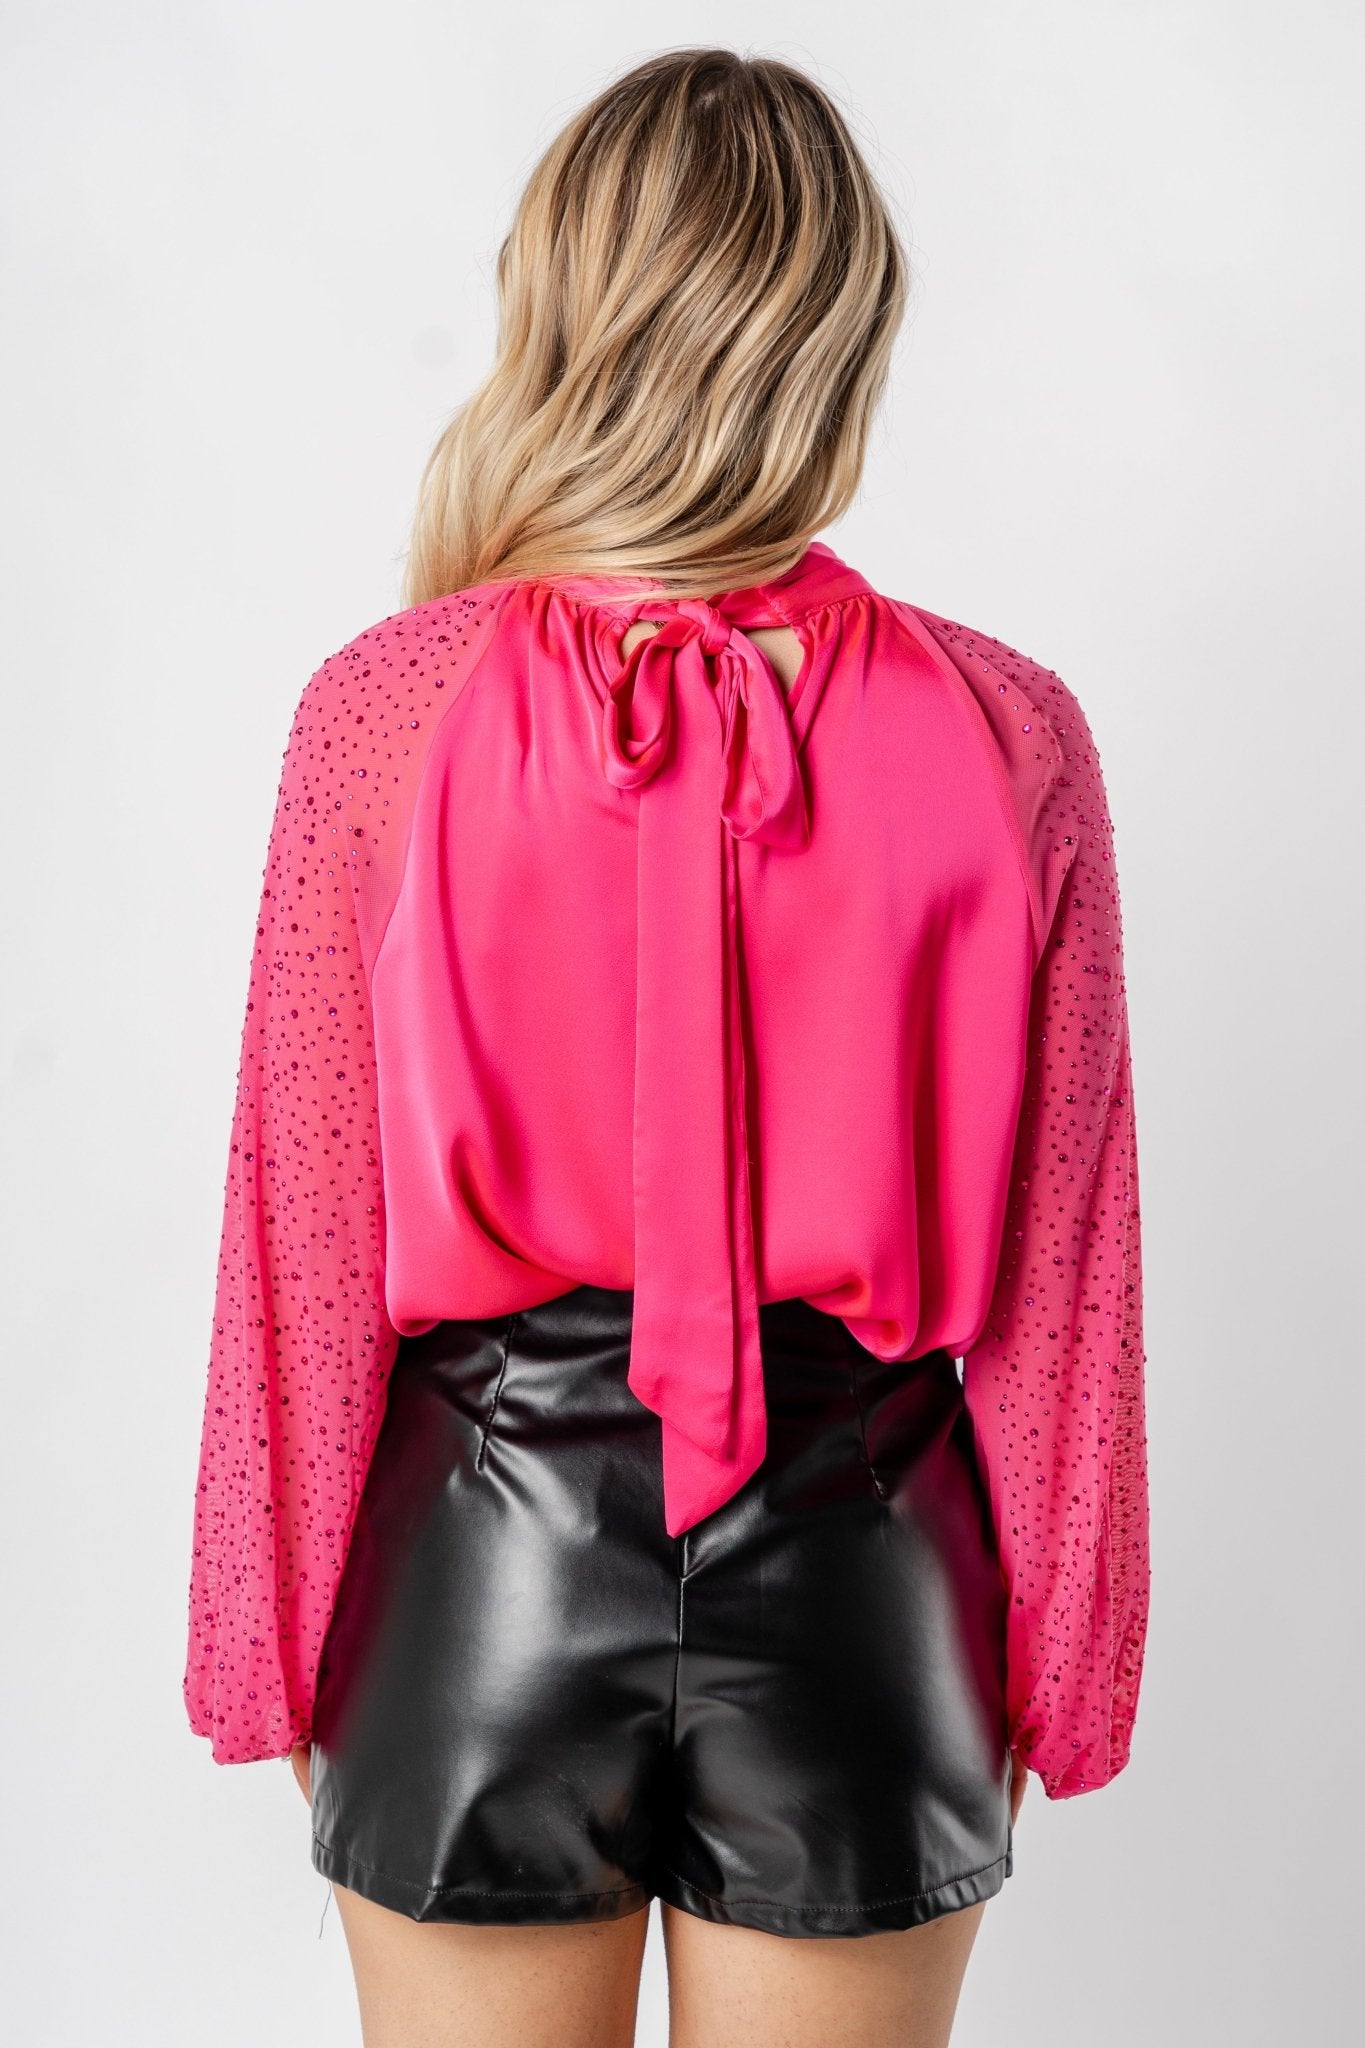 Rhinestone satin blouse pink - Trendy New Year's Eve Dresses, Skirts, Kimonos and Sequins at Lush Fashion Lounge Boutique in Oklahoma City